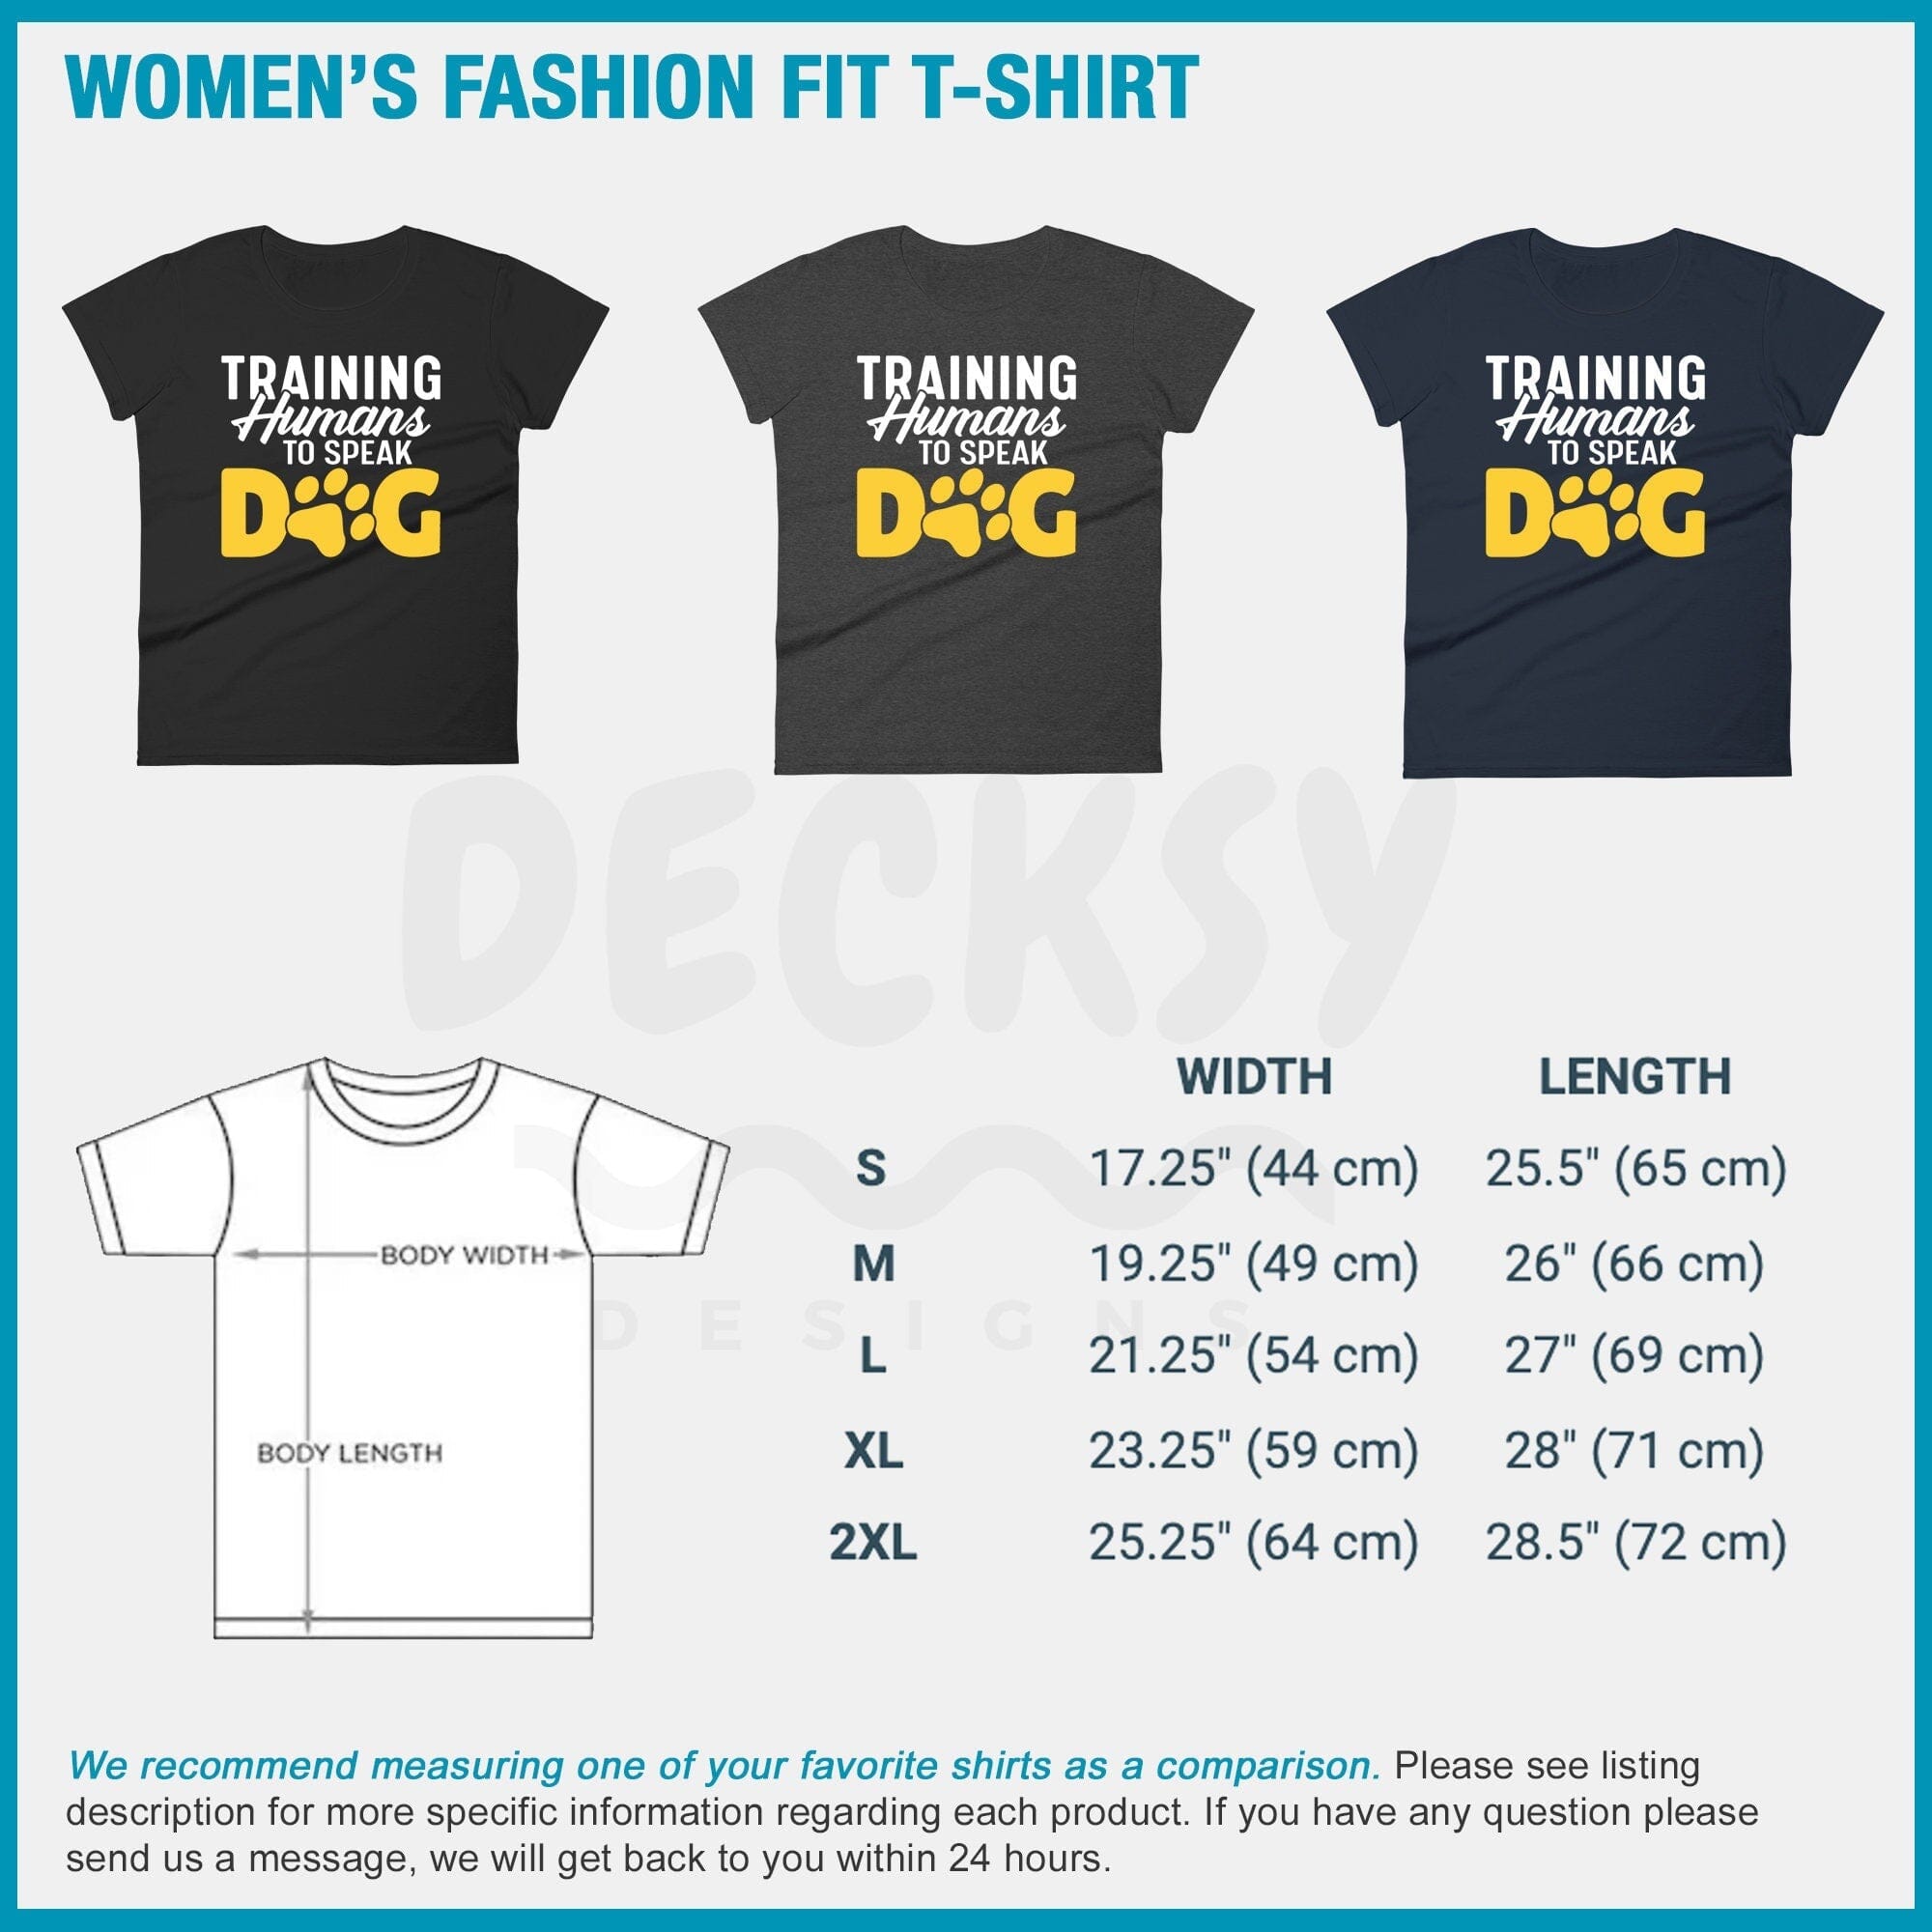 Dog Training Shirt, Gift For Dog Trainer-Clothing:Gender-Neutral Adult Clothing:Tops & Tees:T-shirts:Graphic Tees-DecksyDesigns